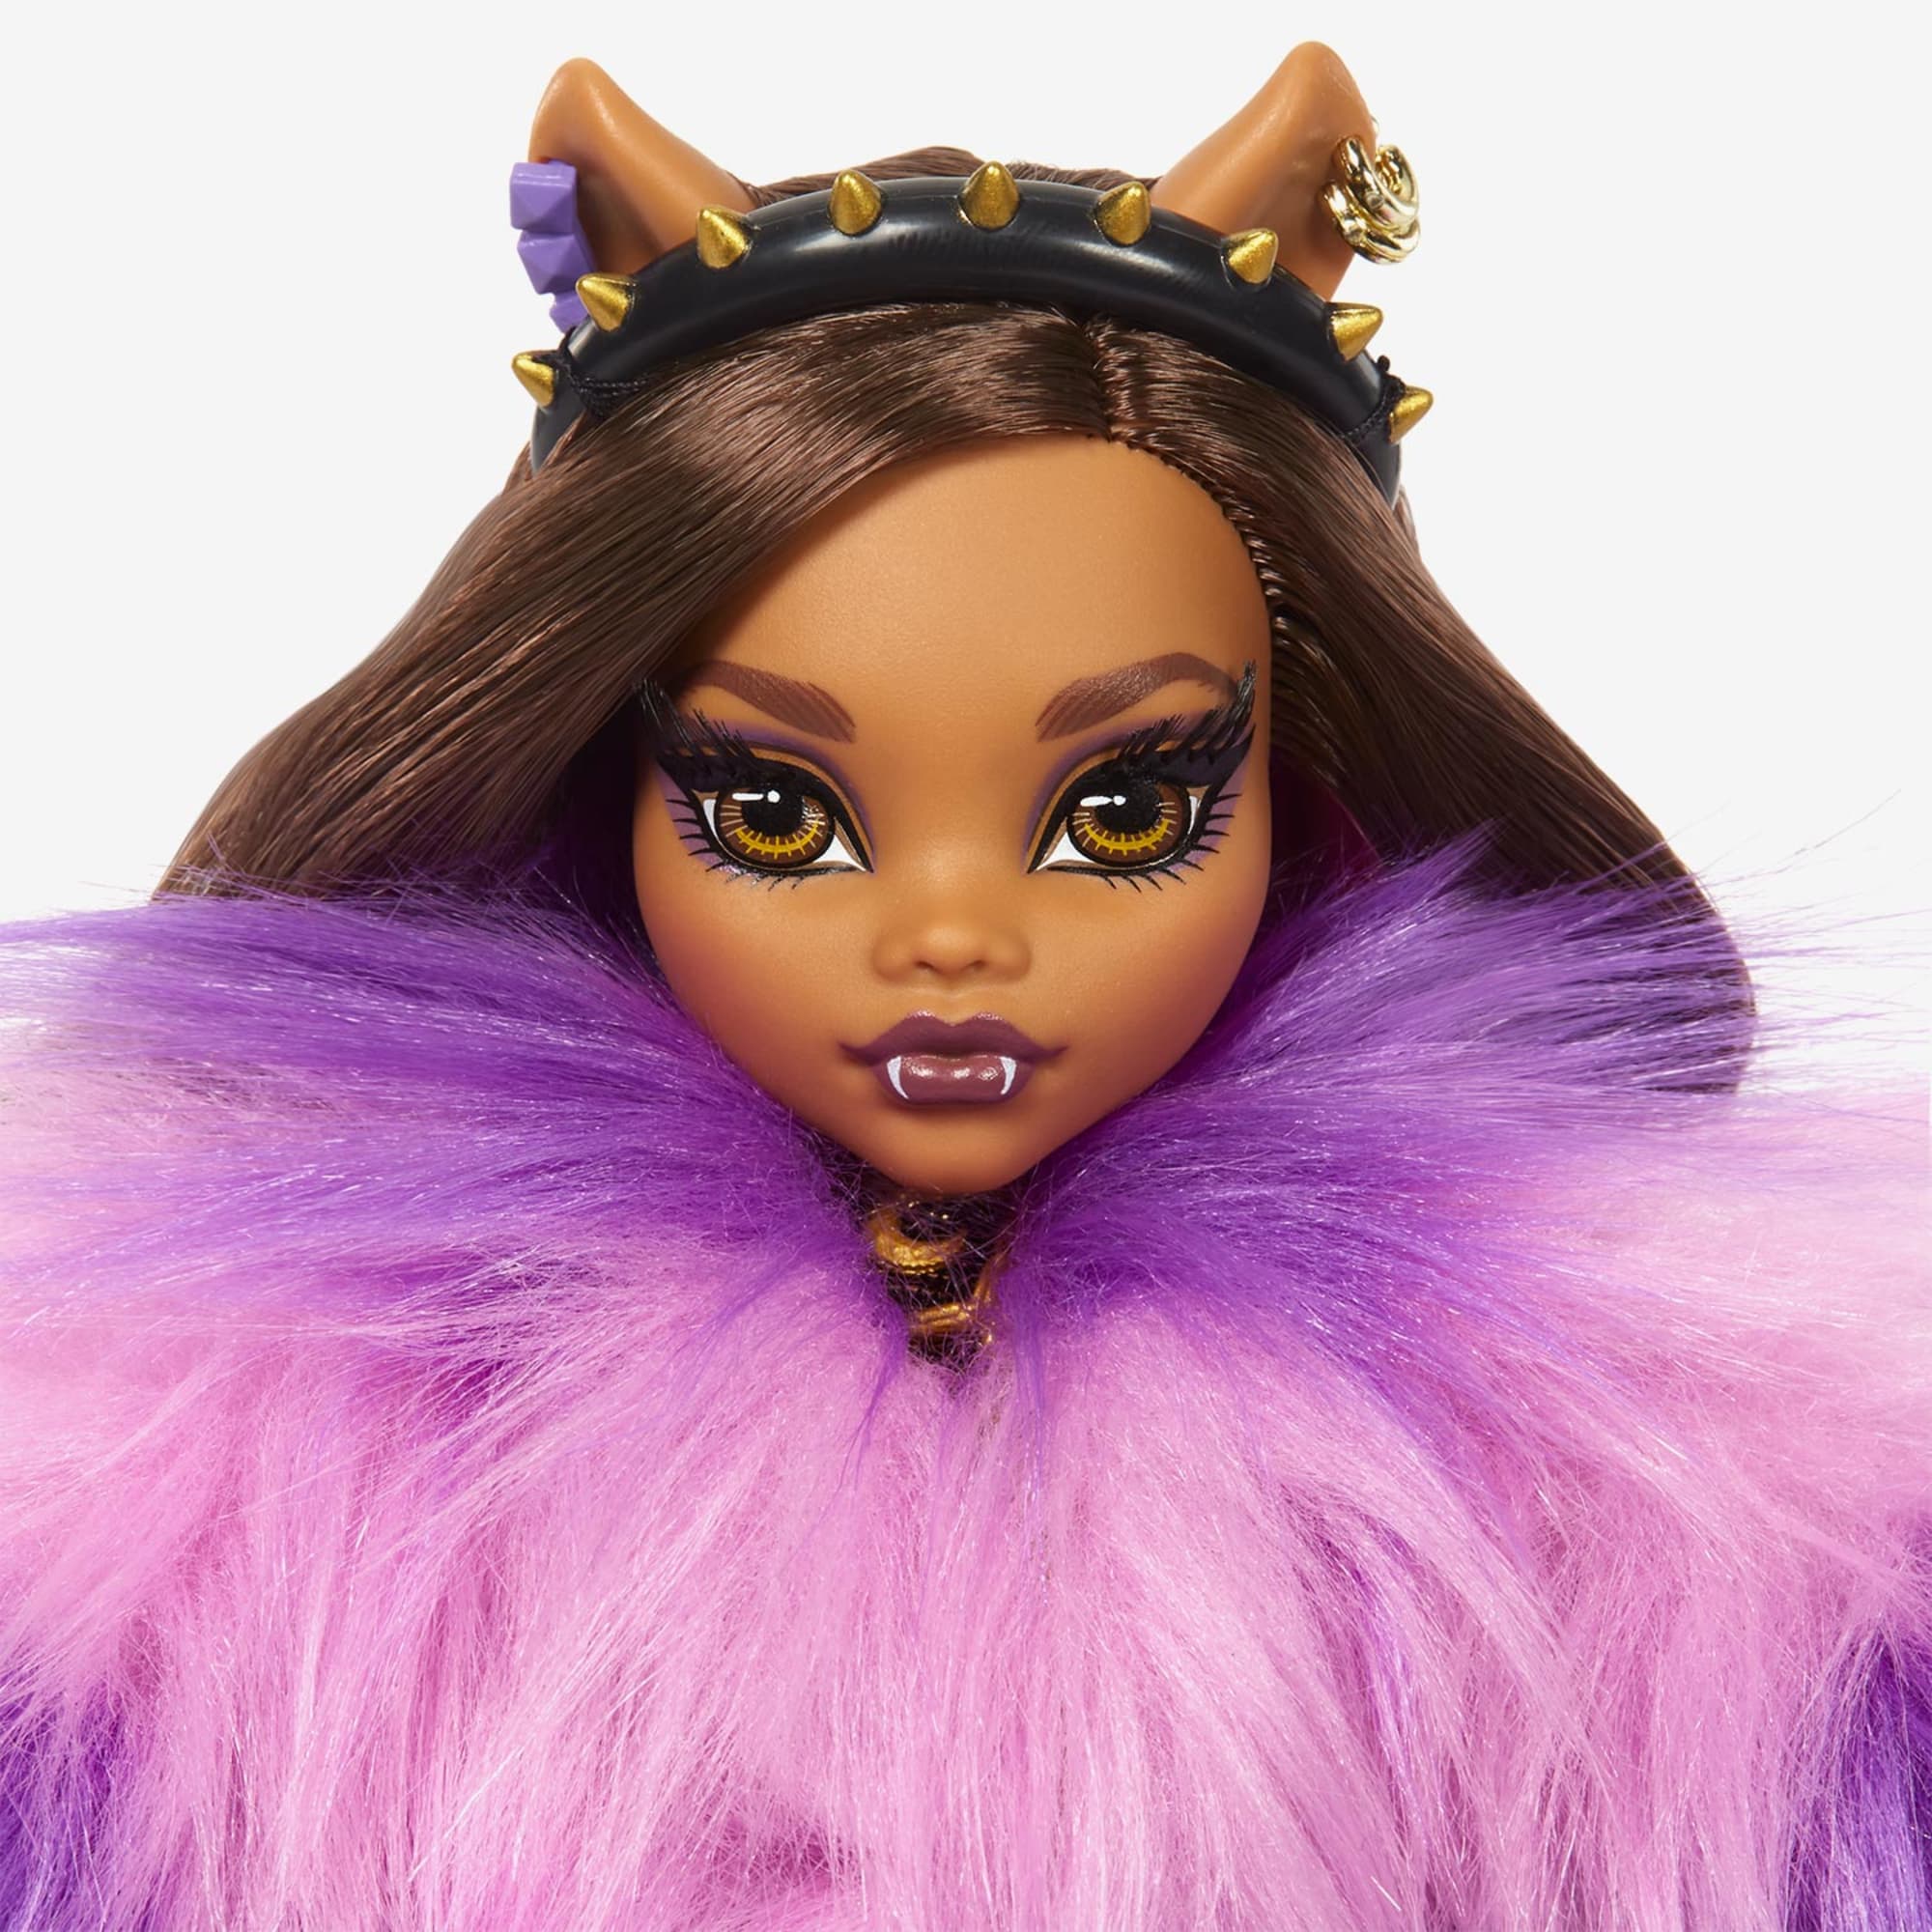 Monster High Clawdeen Haunt Couture Doll